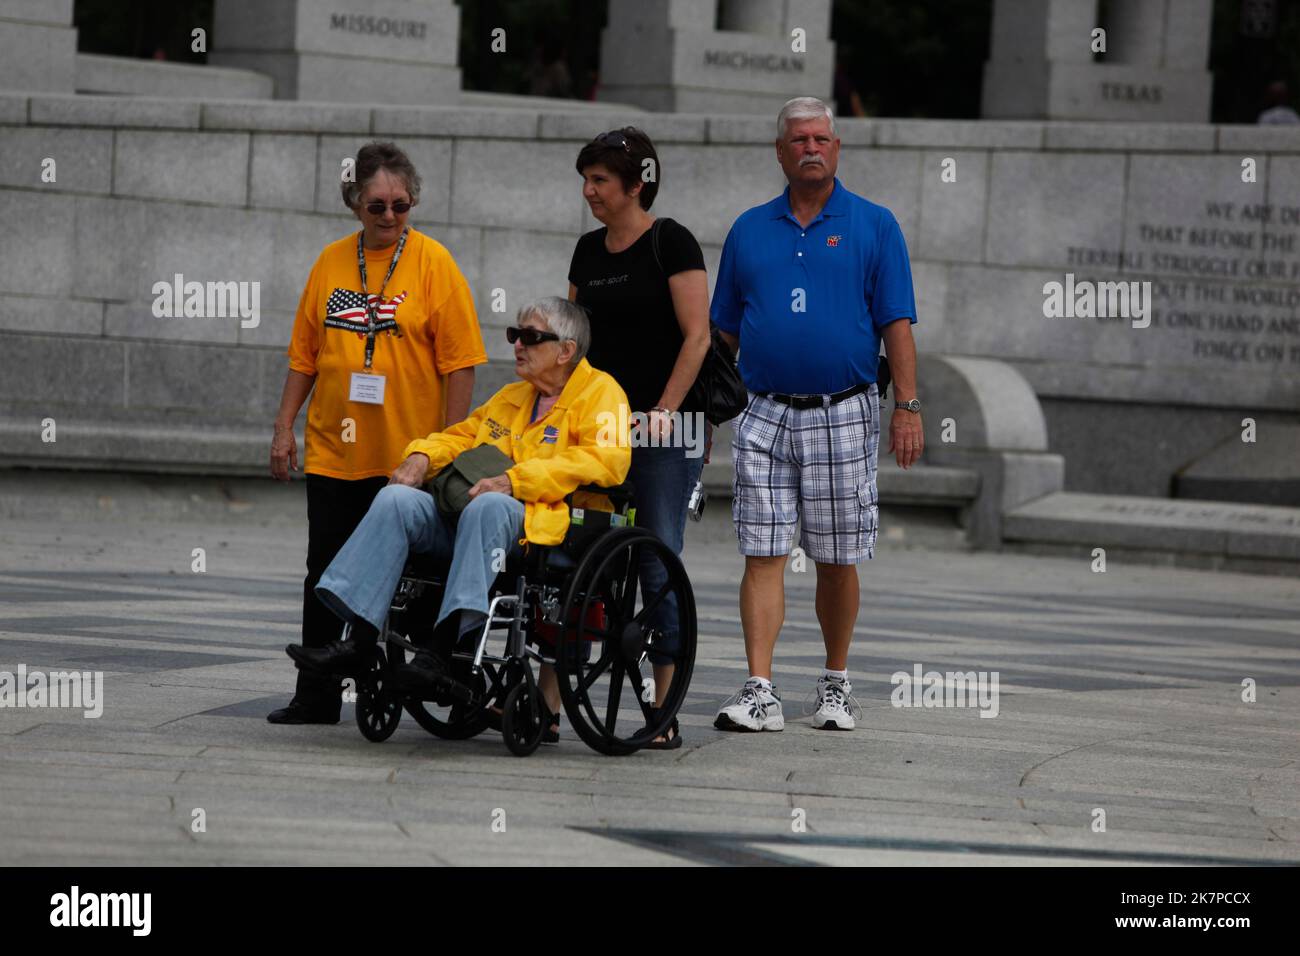 Retired Lt. Col, Marilyn L. Steffel of the United Starts Air Force,85, visits the World War II Memorial with the Honor Flight program on Oct. 4th, 20 Stock Photo